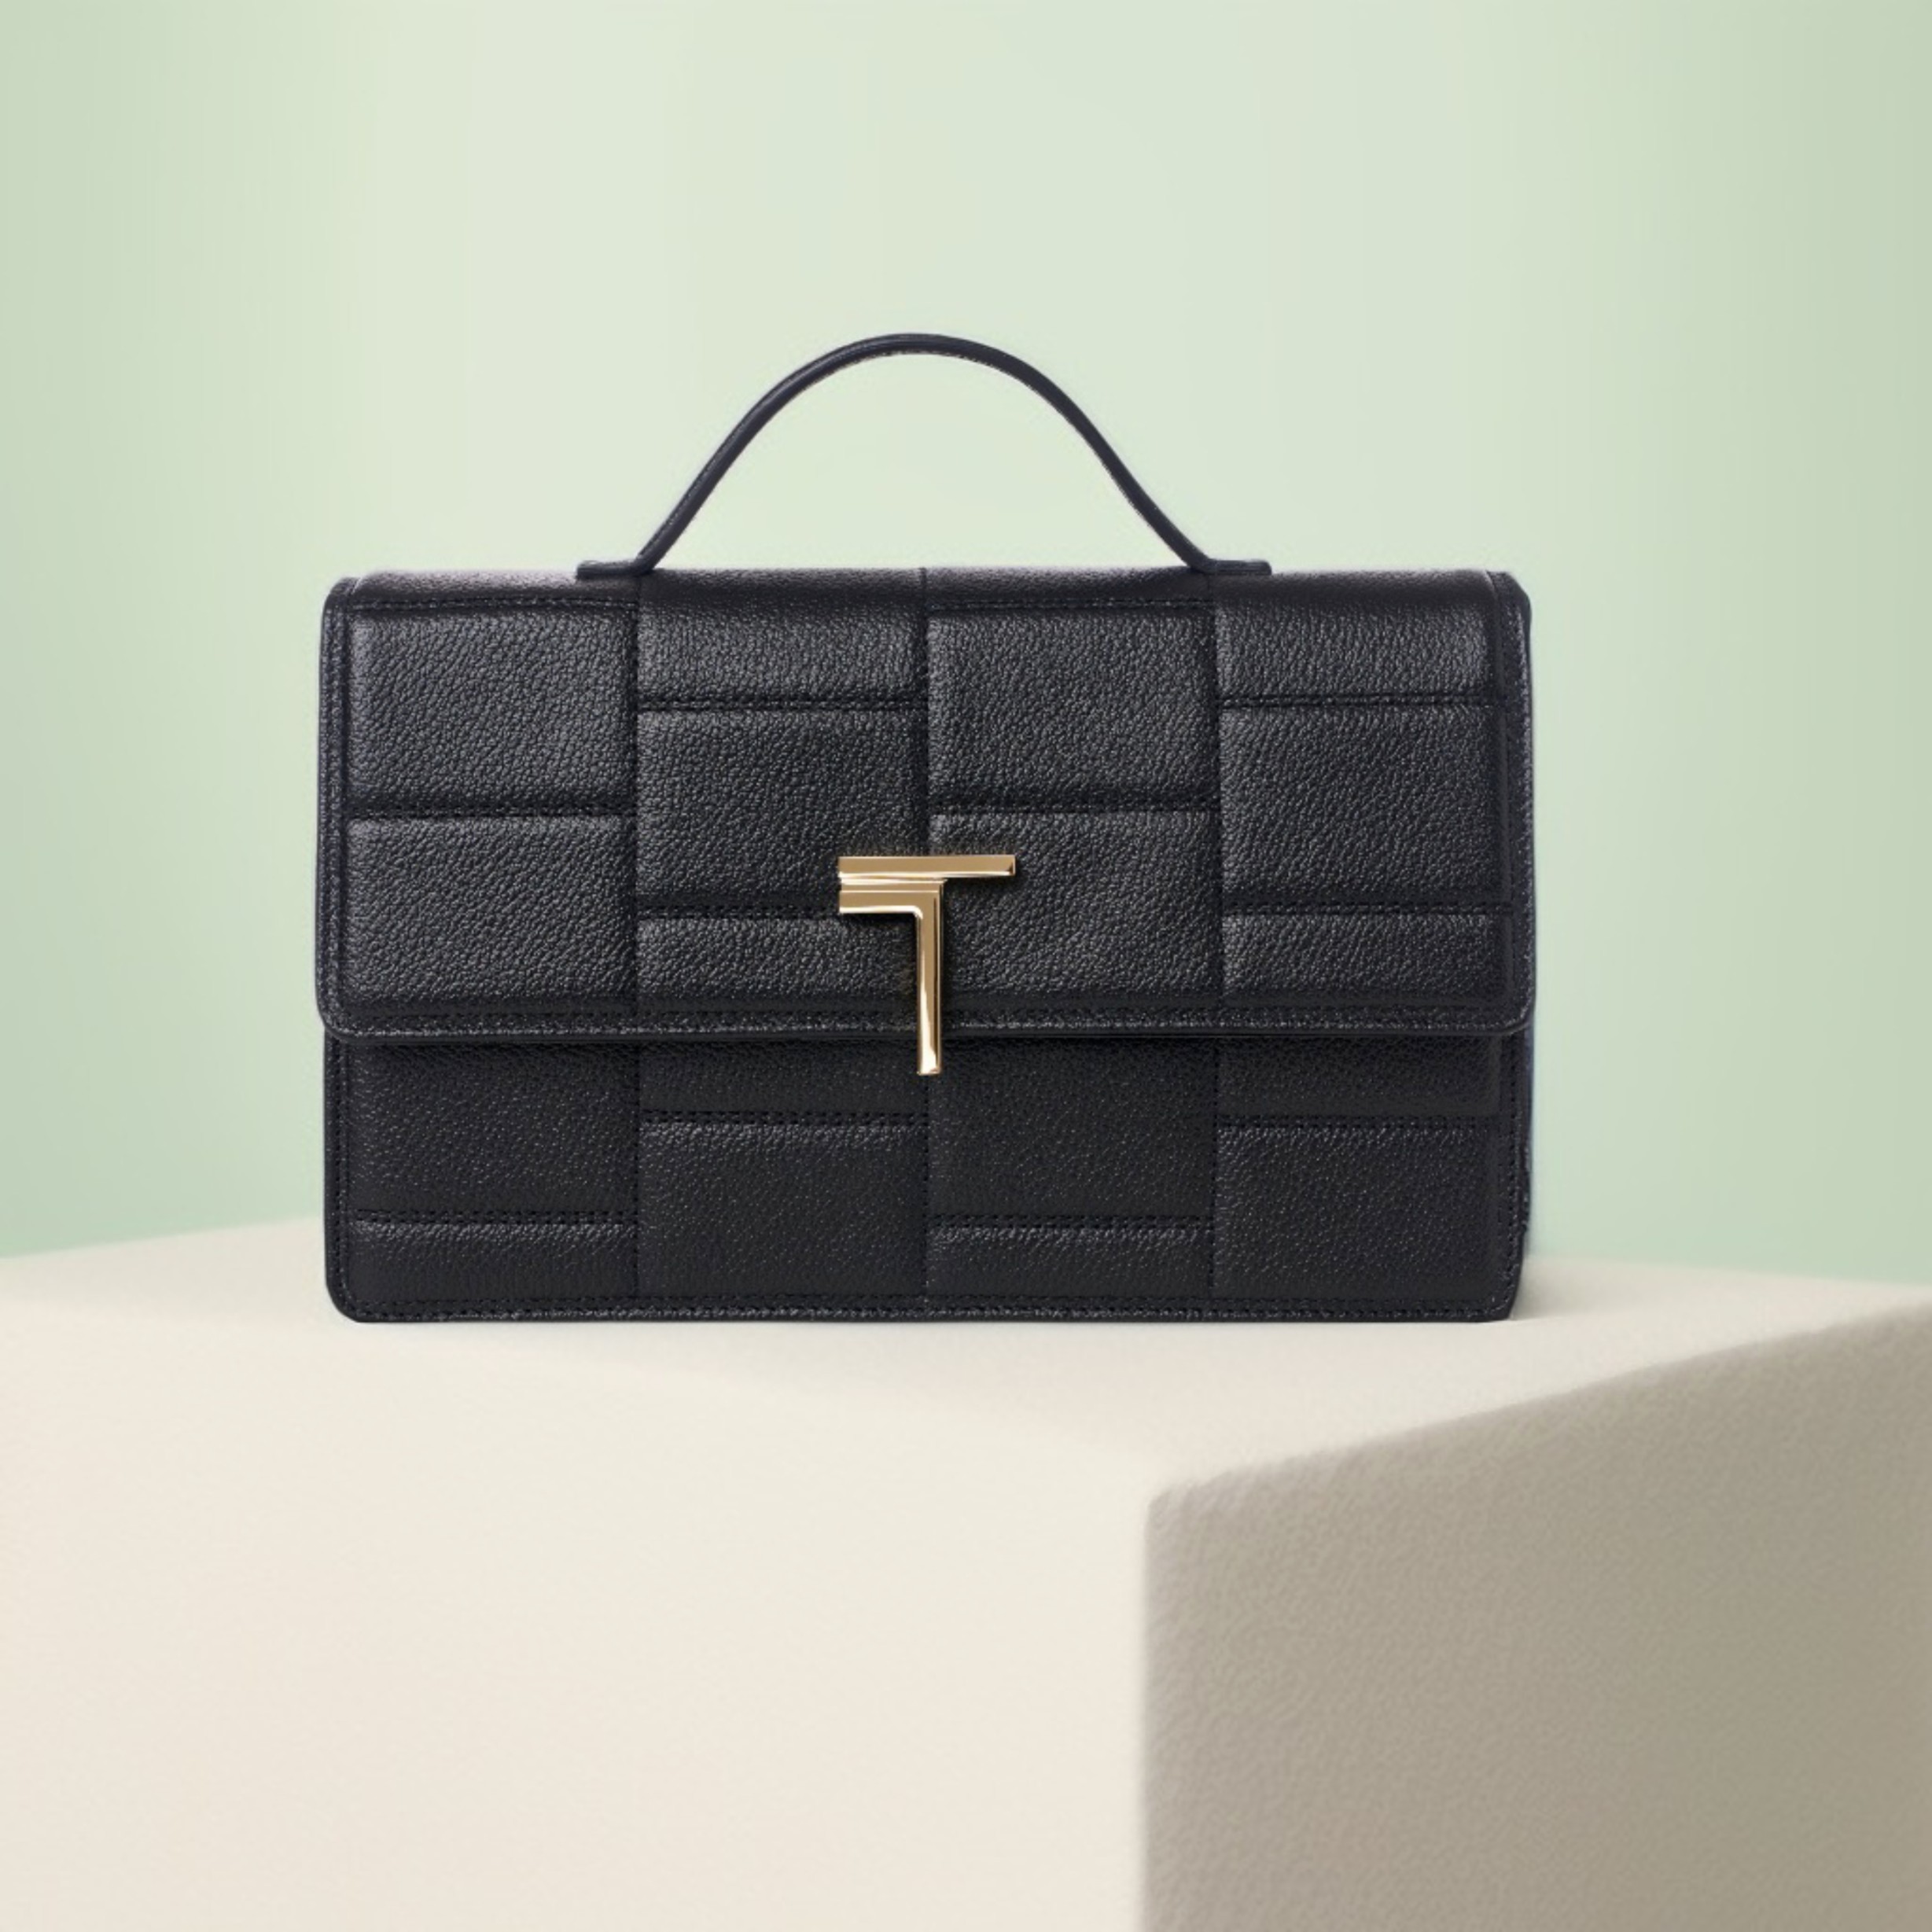 A Trevony Minerva handbag in black scratch-resistant lambskin leather with a prominent gold Trevony logo closure, displayed against a soft pastel background.